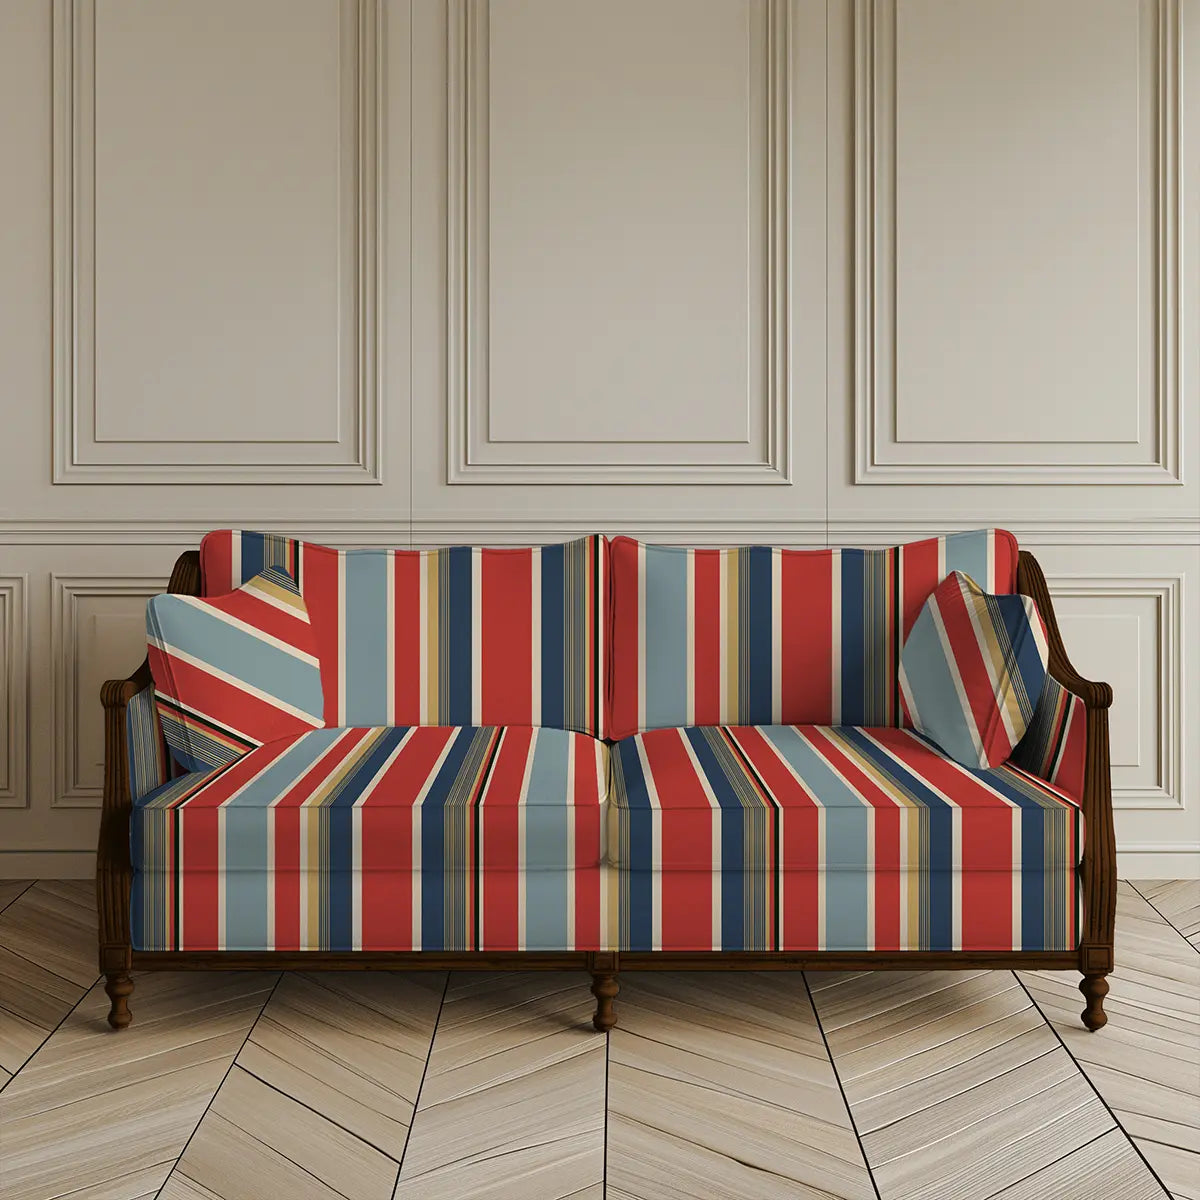 Buy English Style Stripes Sofa and Chairs upholstery Fabric Red and Blue